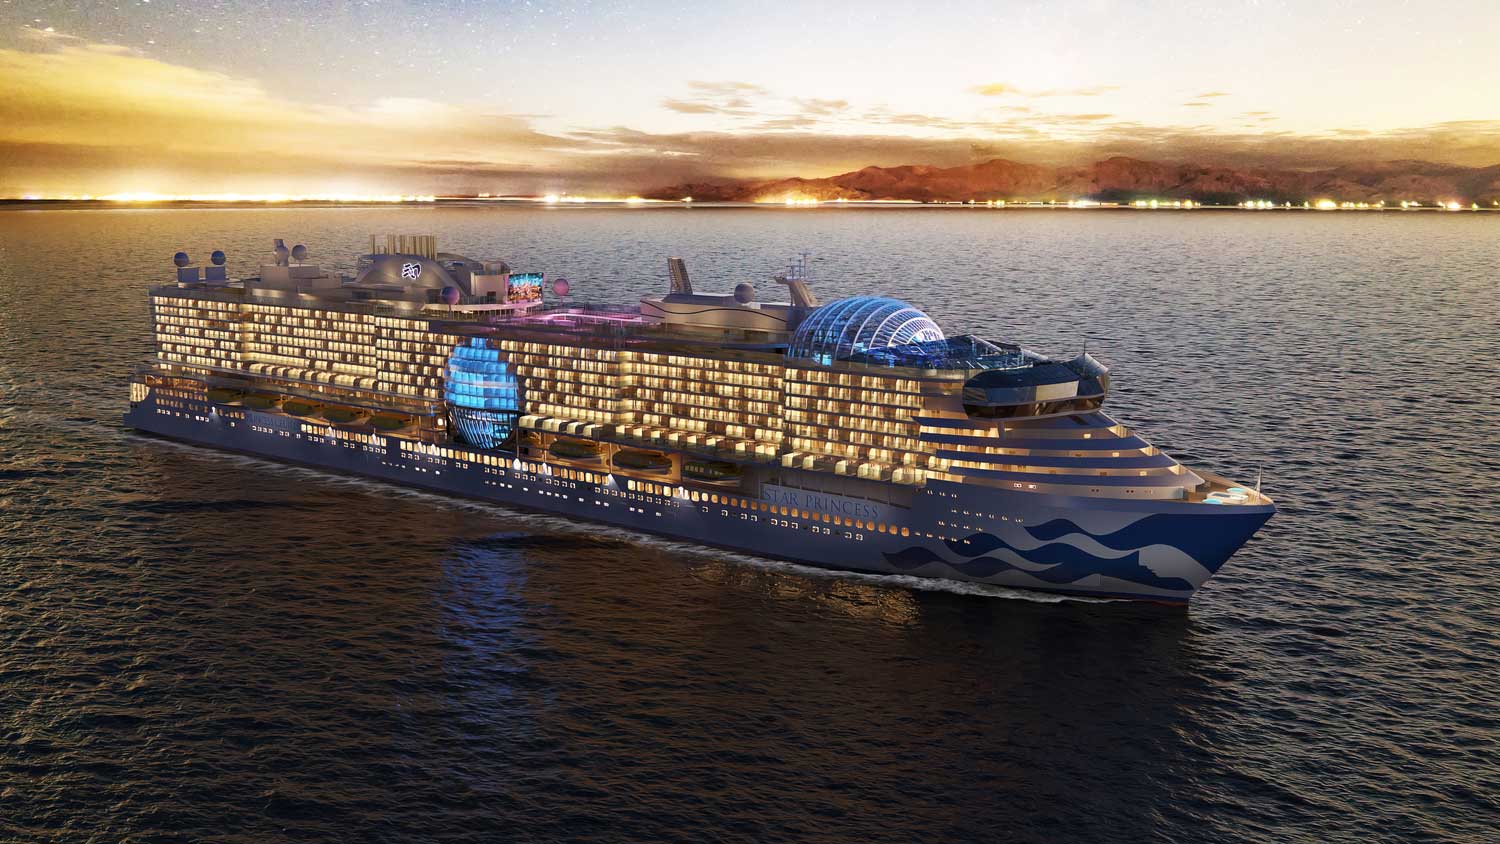 The Star Princess will be among the two biggest ships for the cruise line.